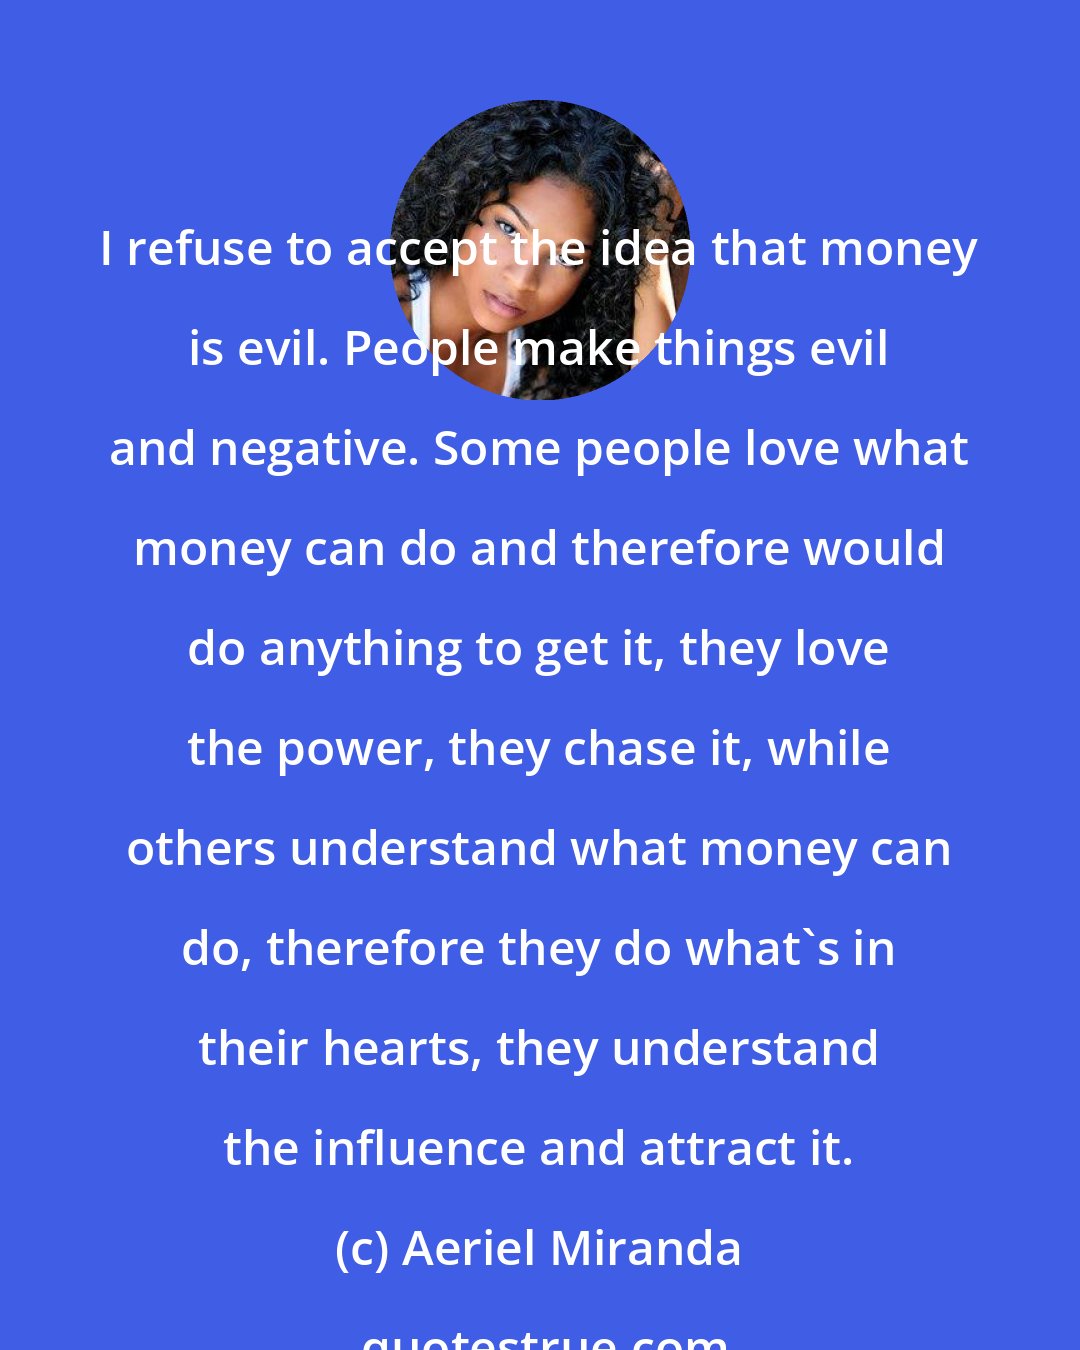 Aeriel Miranda: I refuse to accept the idea that money is evil. People make things evil and negative. Some people love what money can do and therefore would do anything to get it, they love the power, they chase it, while others understand what money can do, therefore they do what's in their hearts, they understand the influence and attract it.